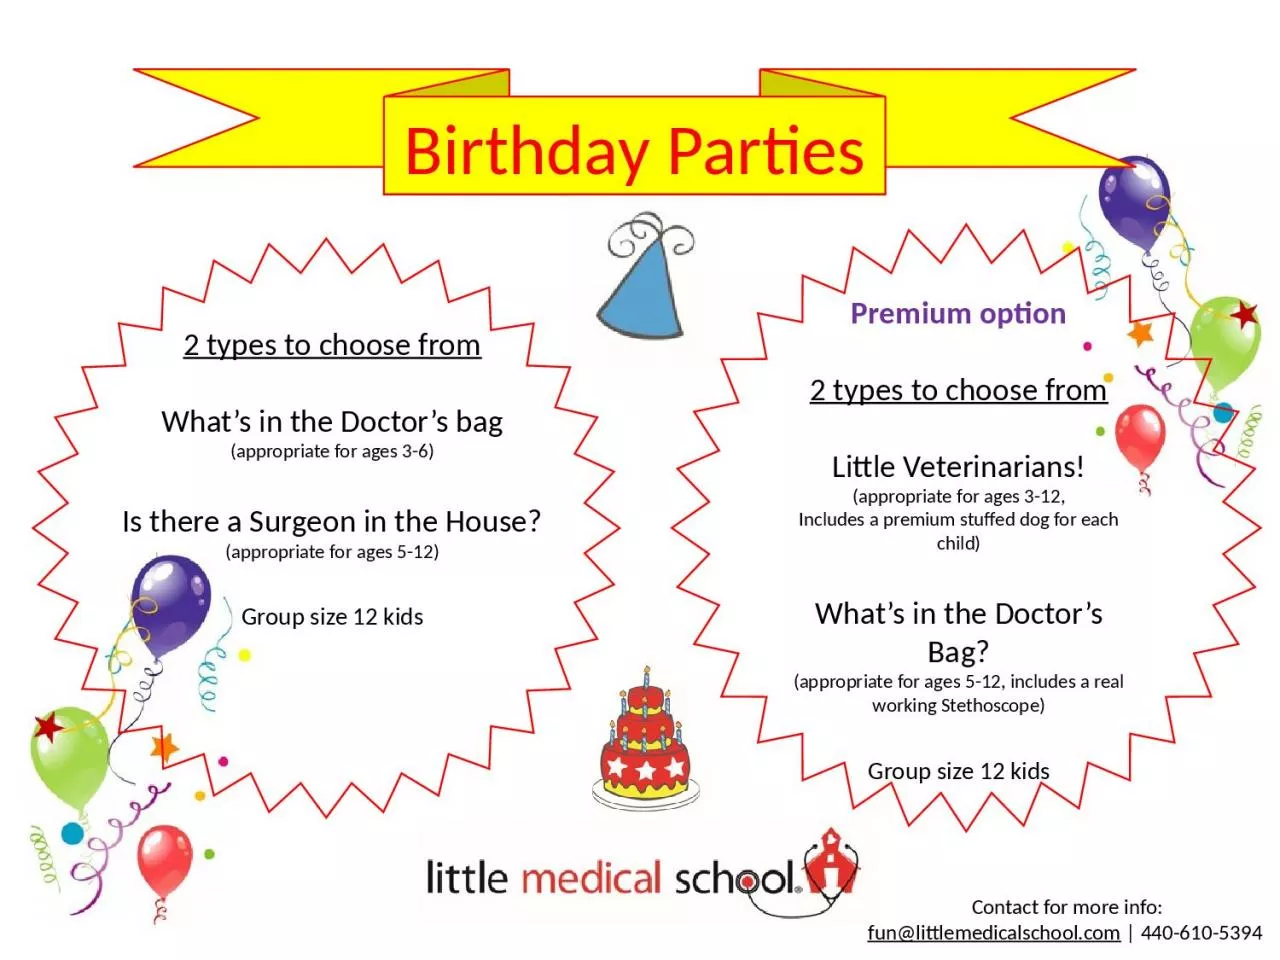 Birthday Parties 2 types to choose from